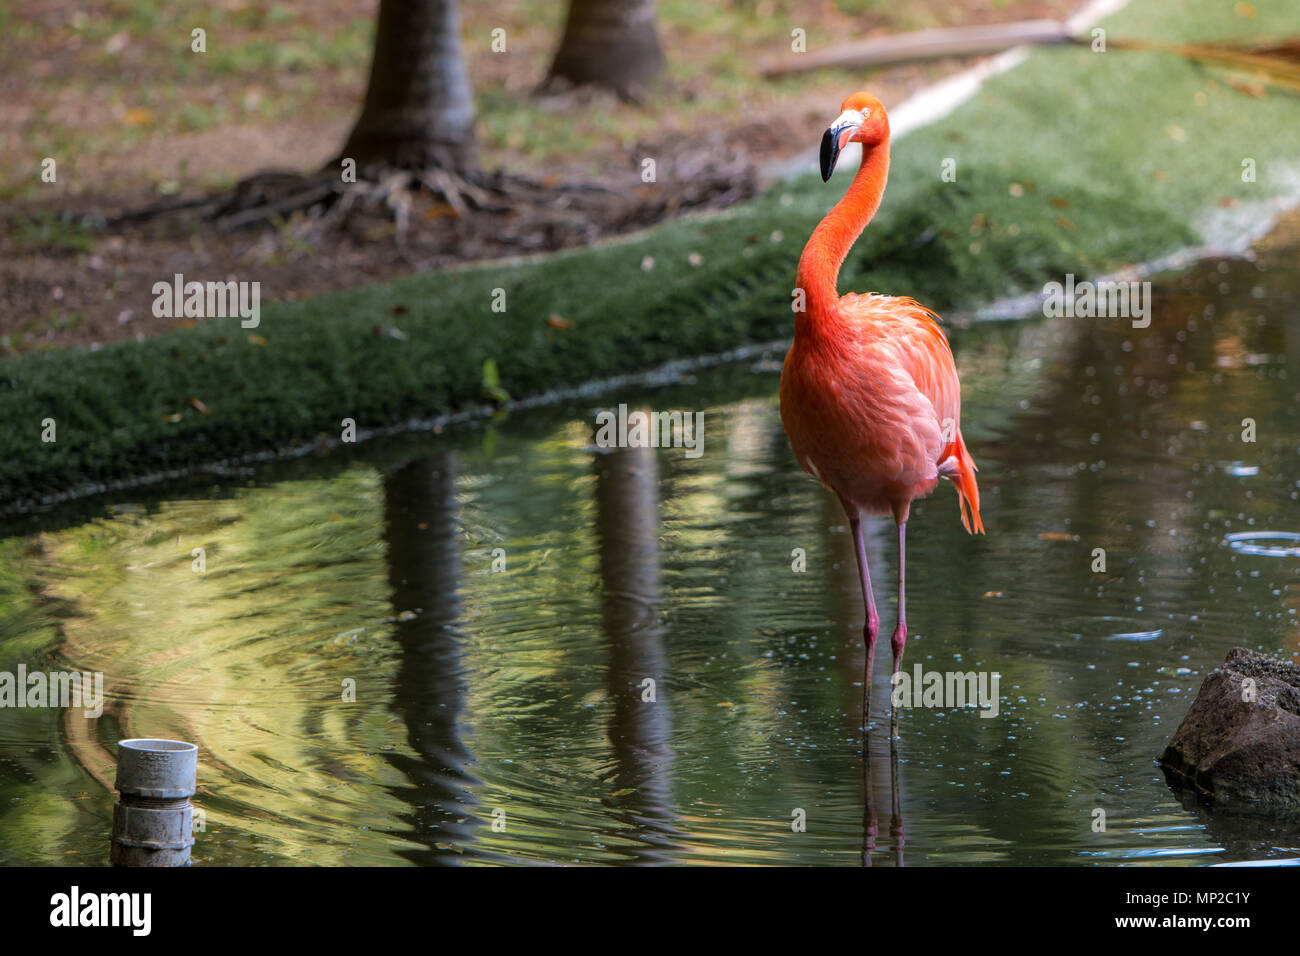 Red and pink flamingos in a pond Stock Photo